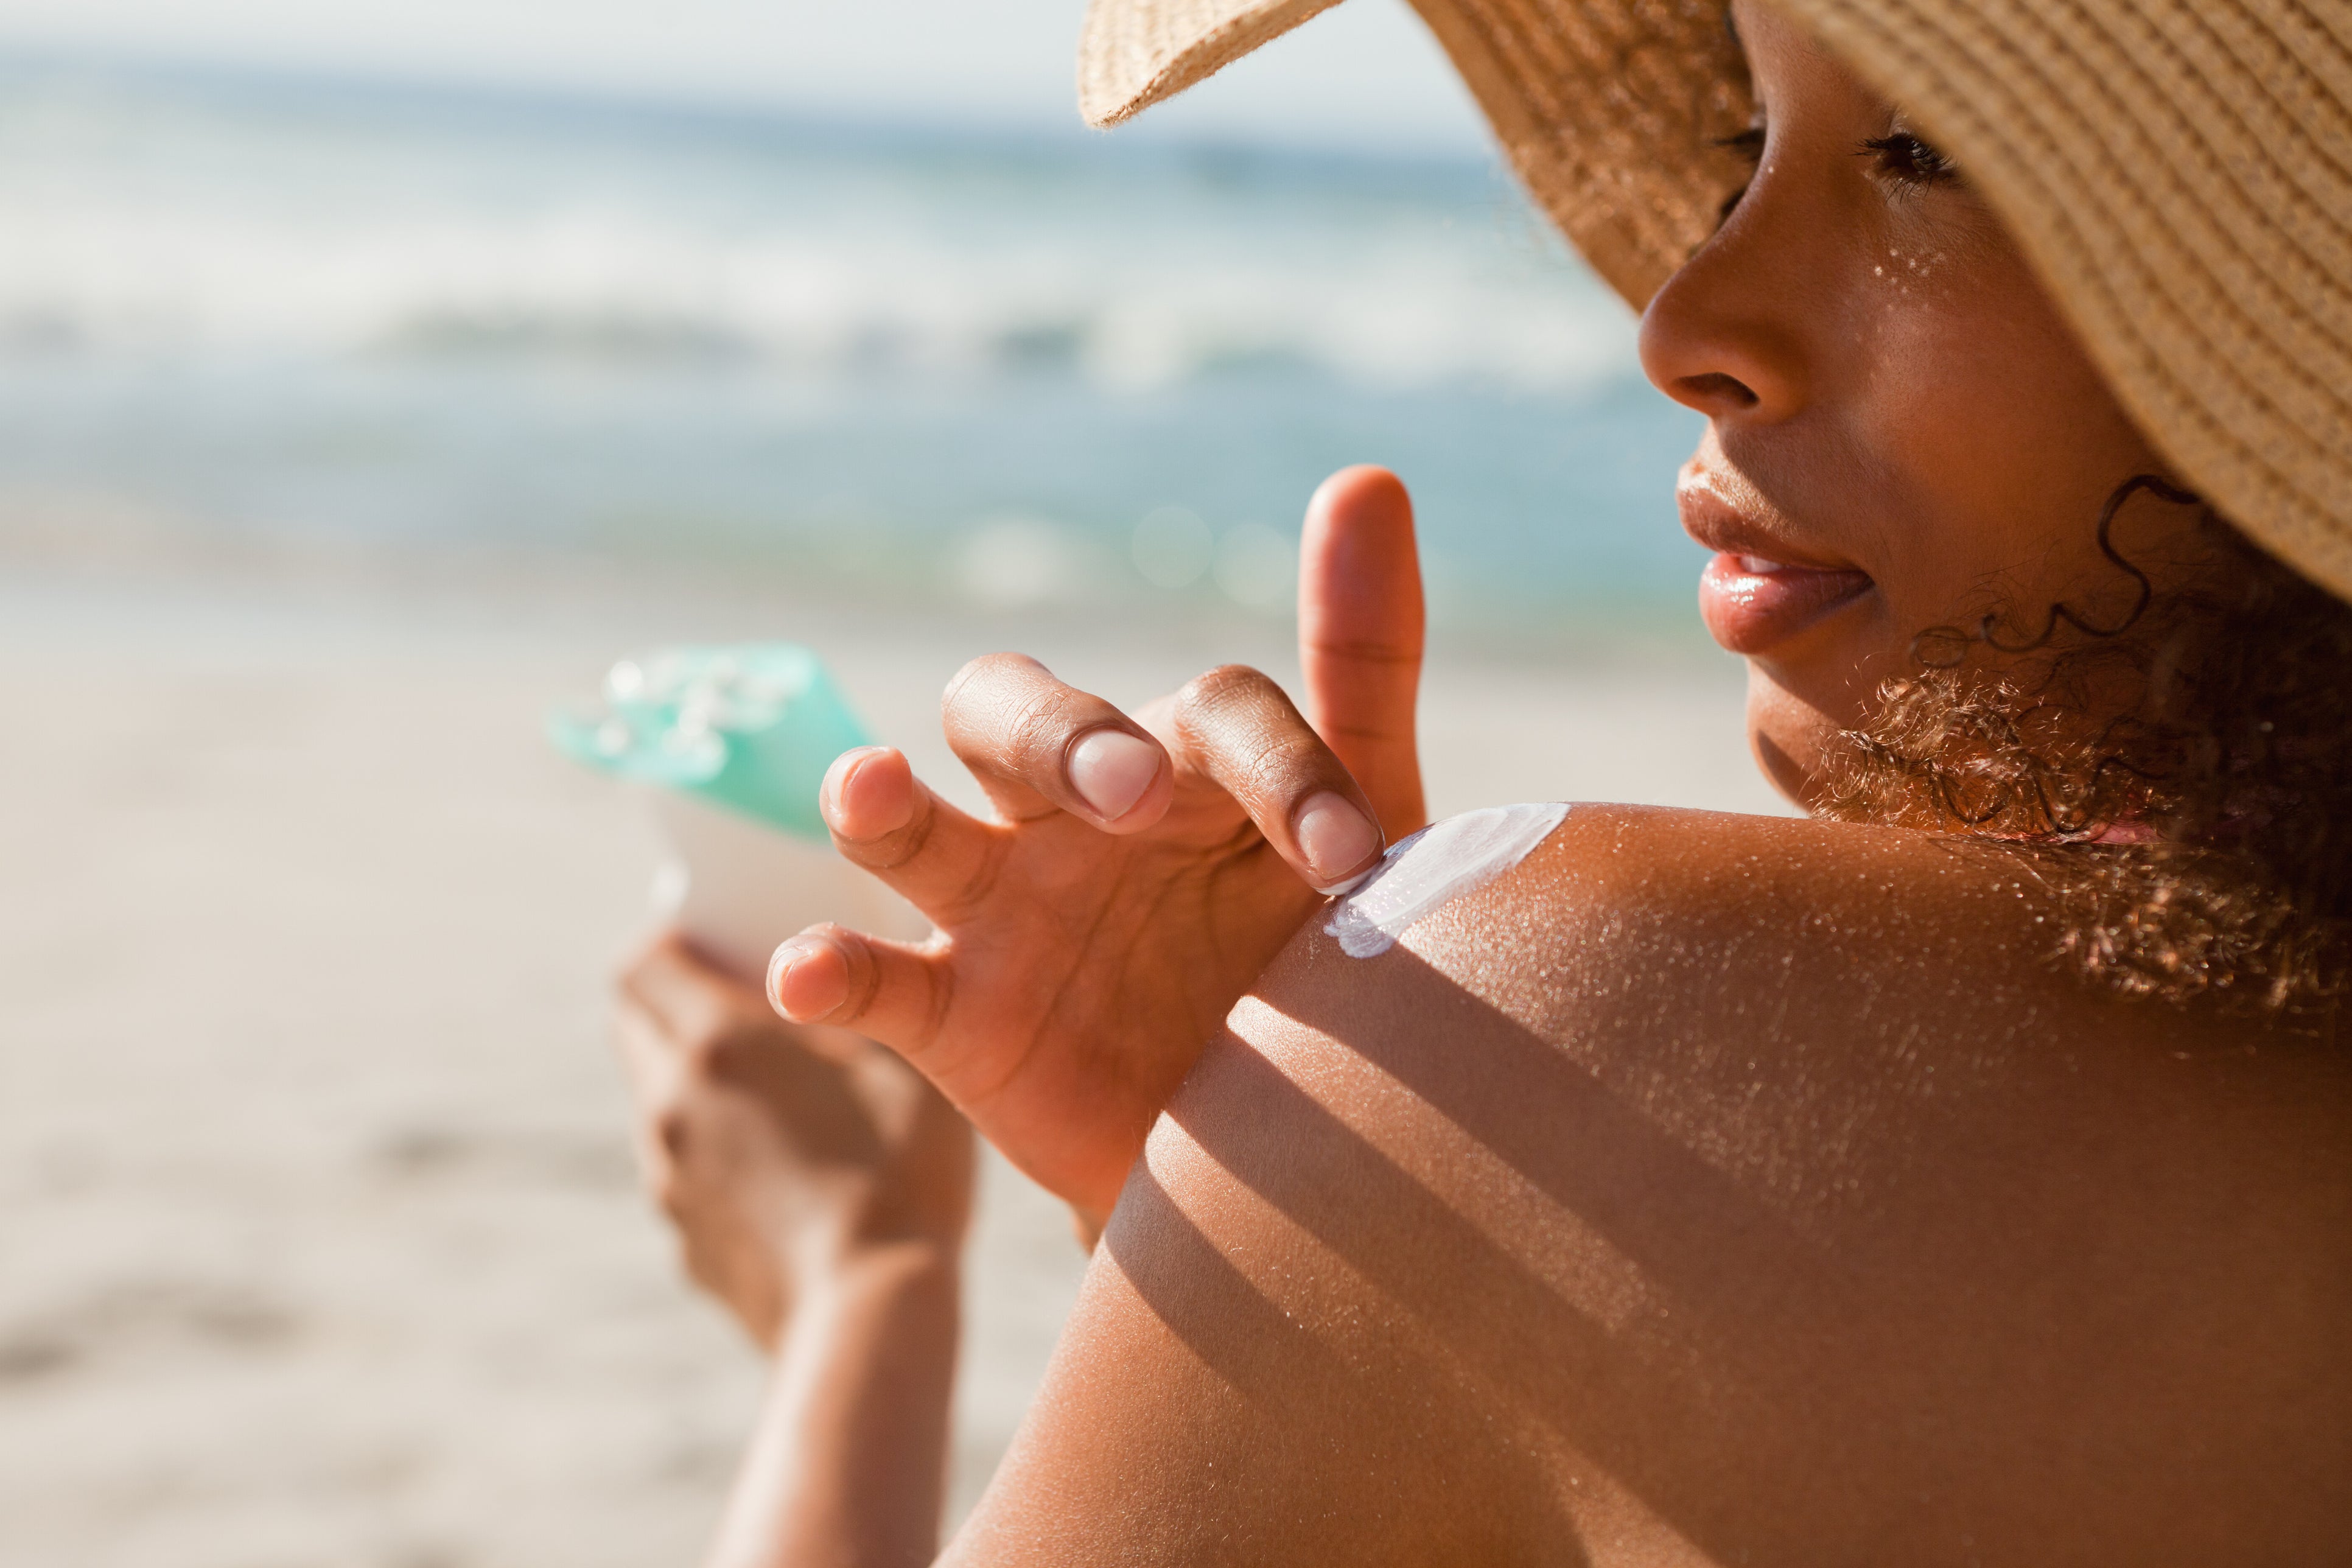 Skin experts advise using a minimum of 30+ SPF protection while in the sun